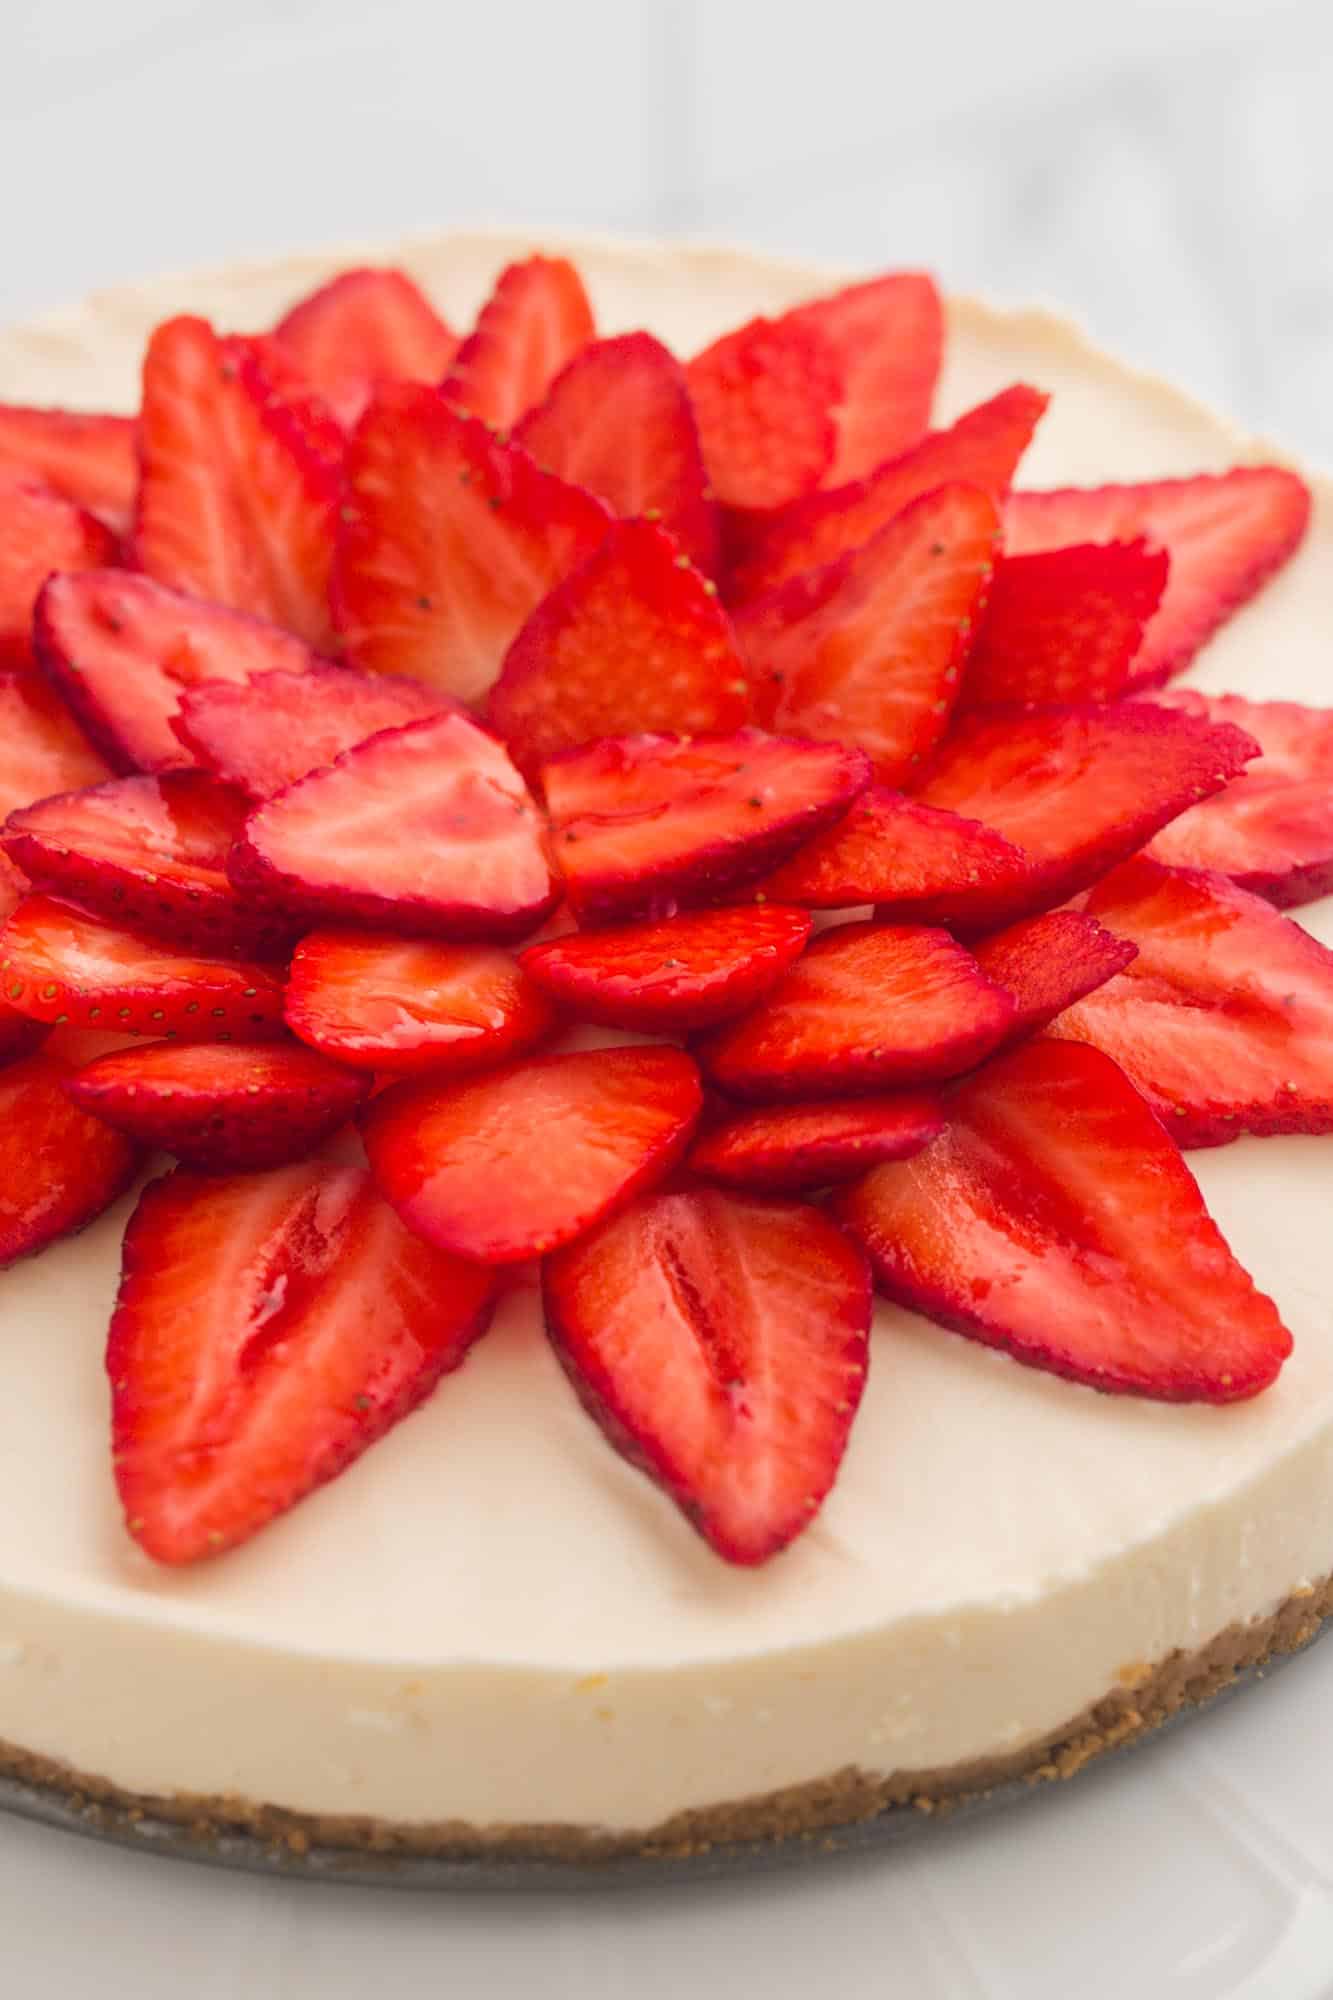 a whole, round, no-bake cheesecake topped with sliced strawberries in a flower pattern